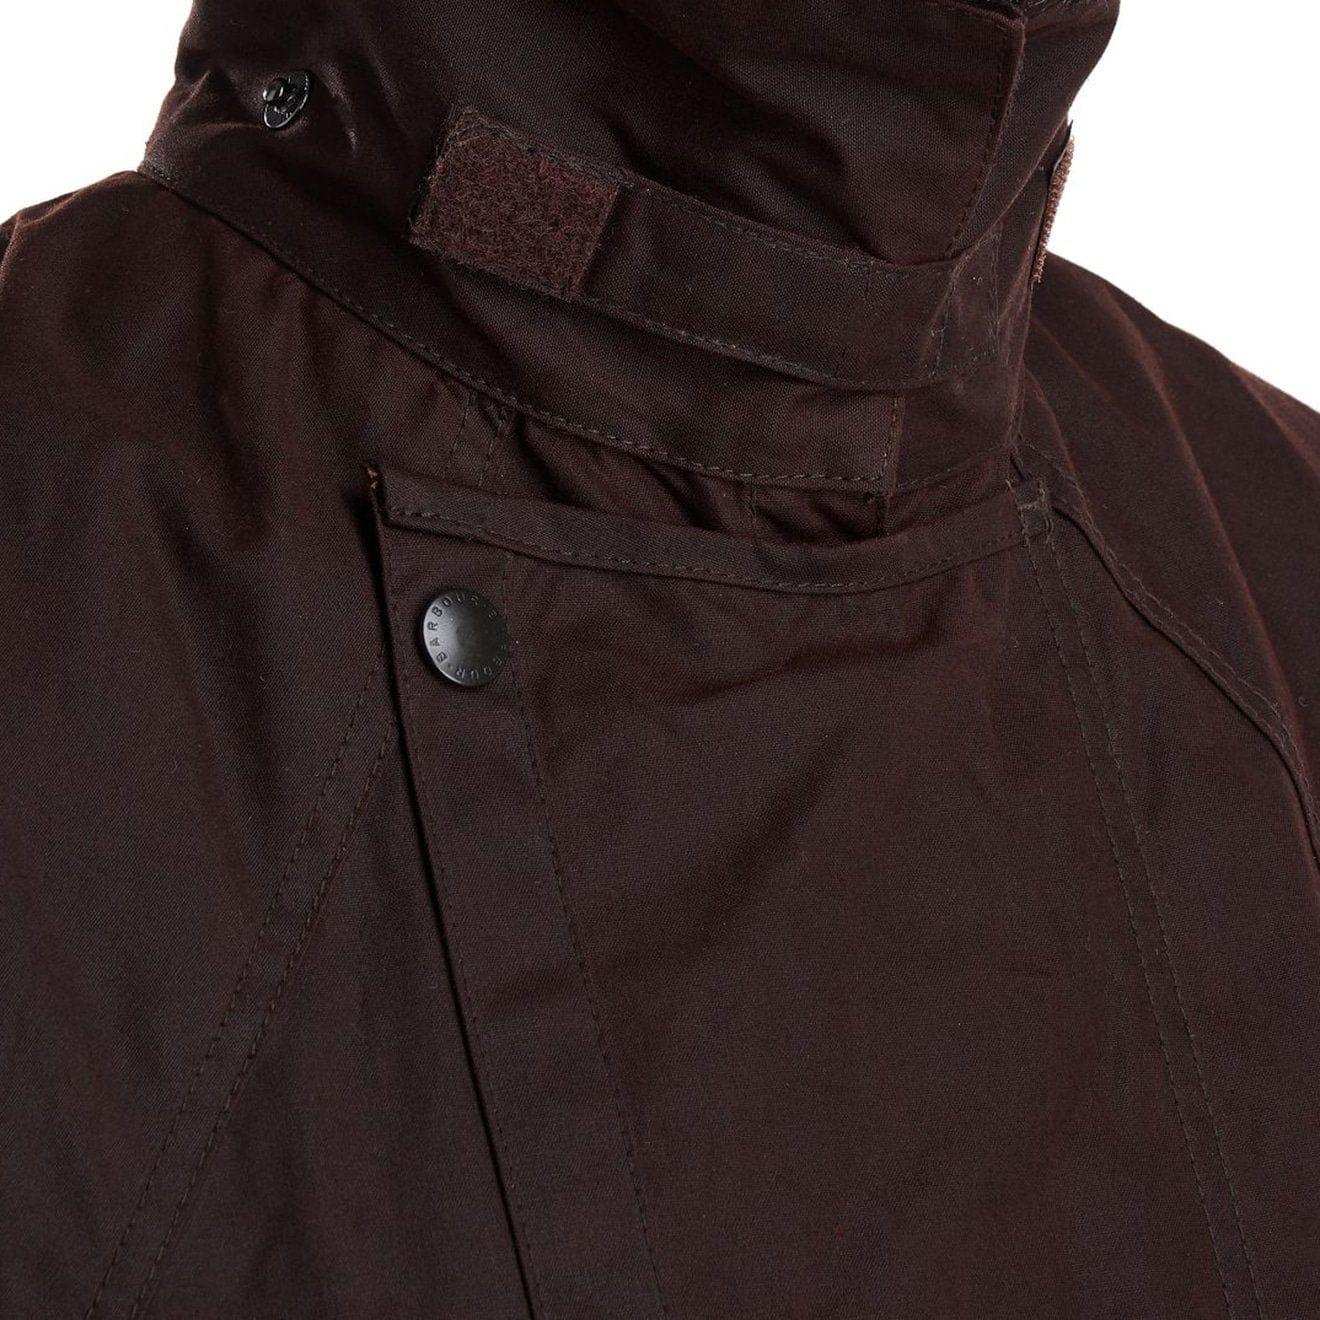 Barbour Cotton Stockman Wax Coat in Brown for Men - Save 30% | Lyst